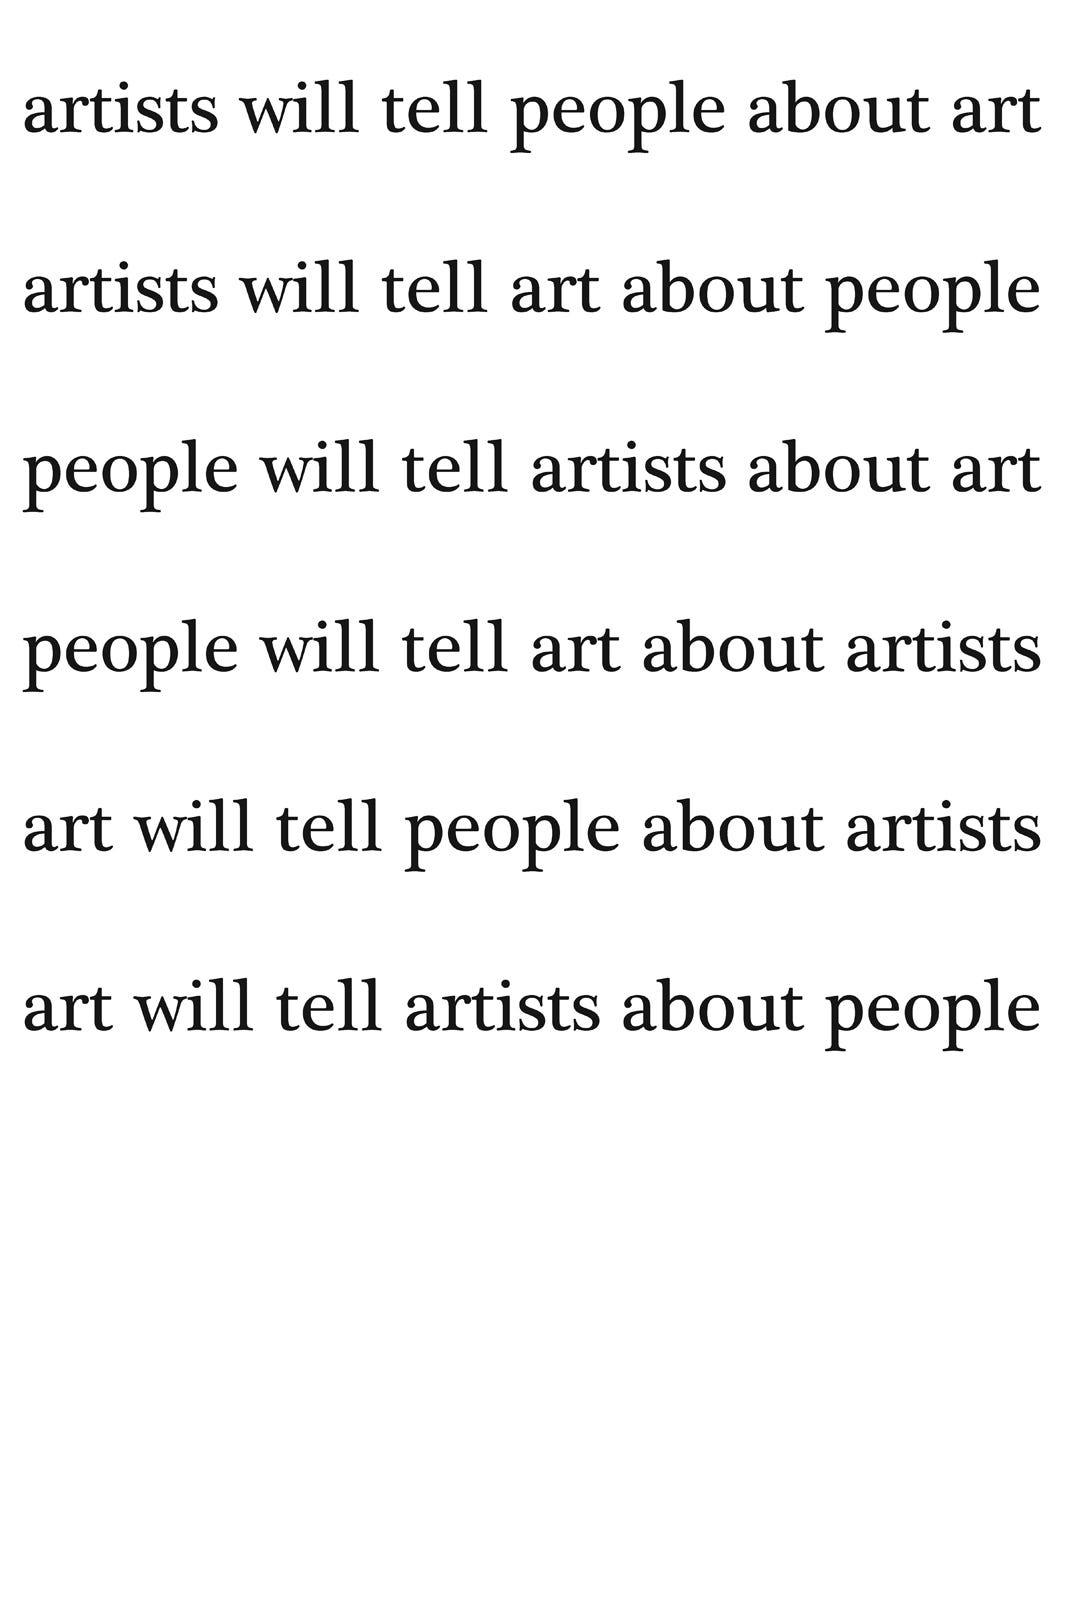 artists will tell people about art. artists will tell art about people. people will tell artists about art. people will tell art about artists. art will tell people about artists. art will tell artists about people.